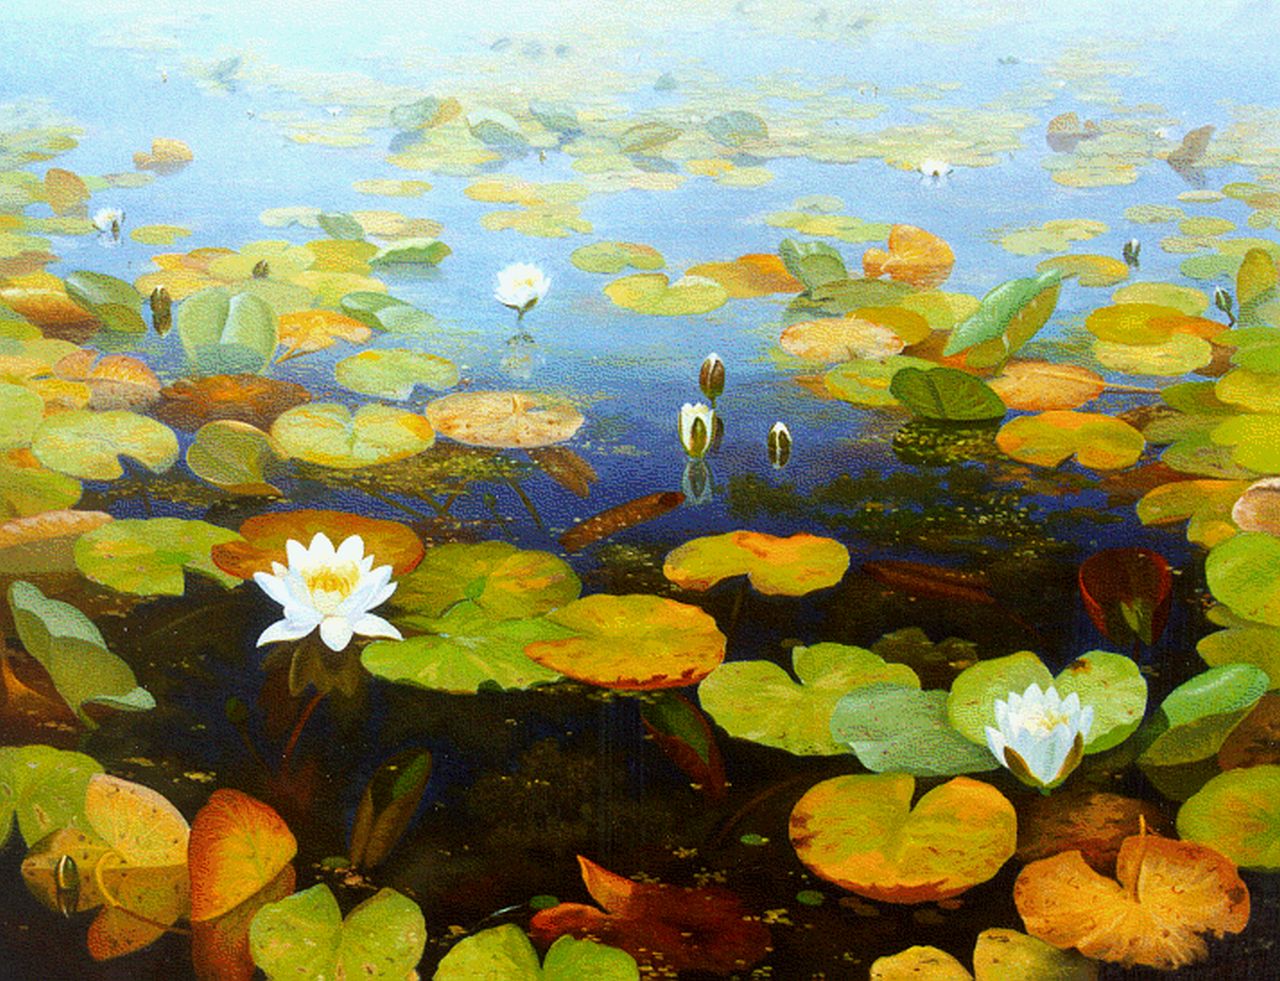 Smorenberg D.  | Dirk Smorenberg, Water lilies, oil on canvas 89.8 x 115.1 cm, signed l.r.